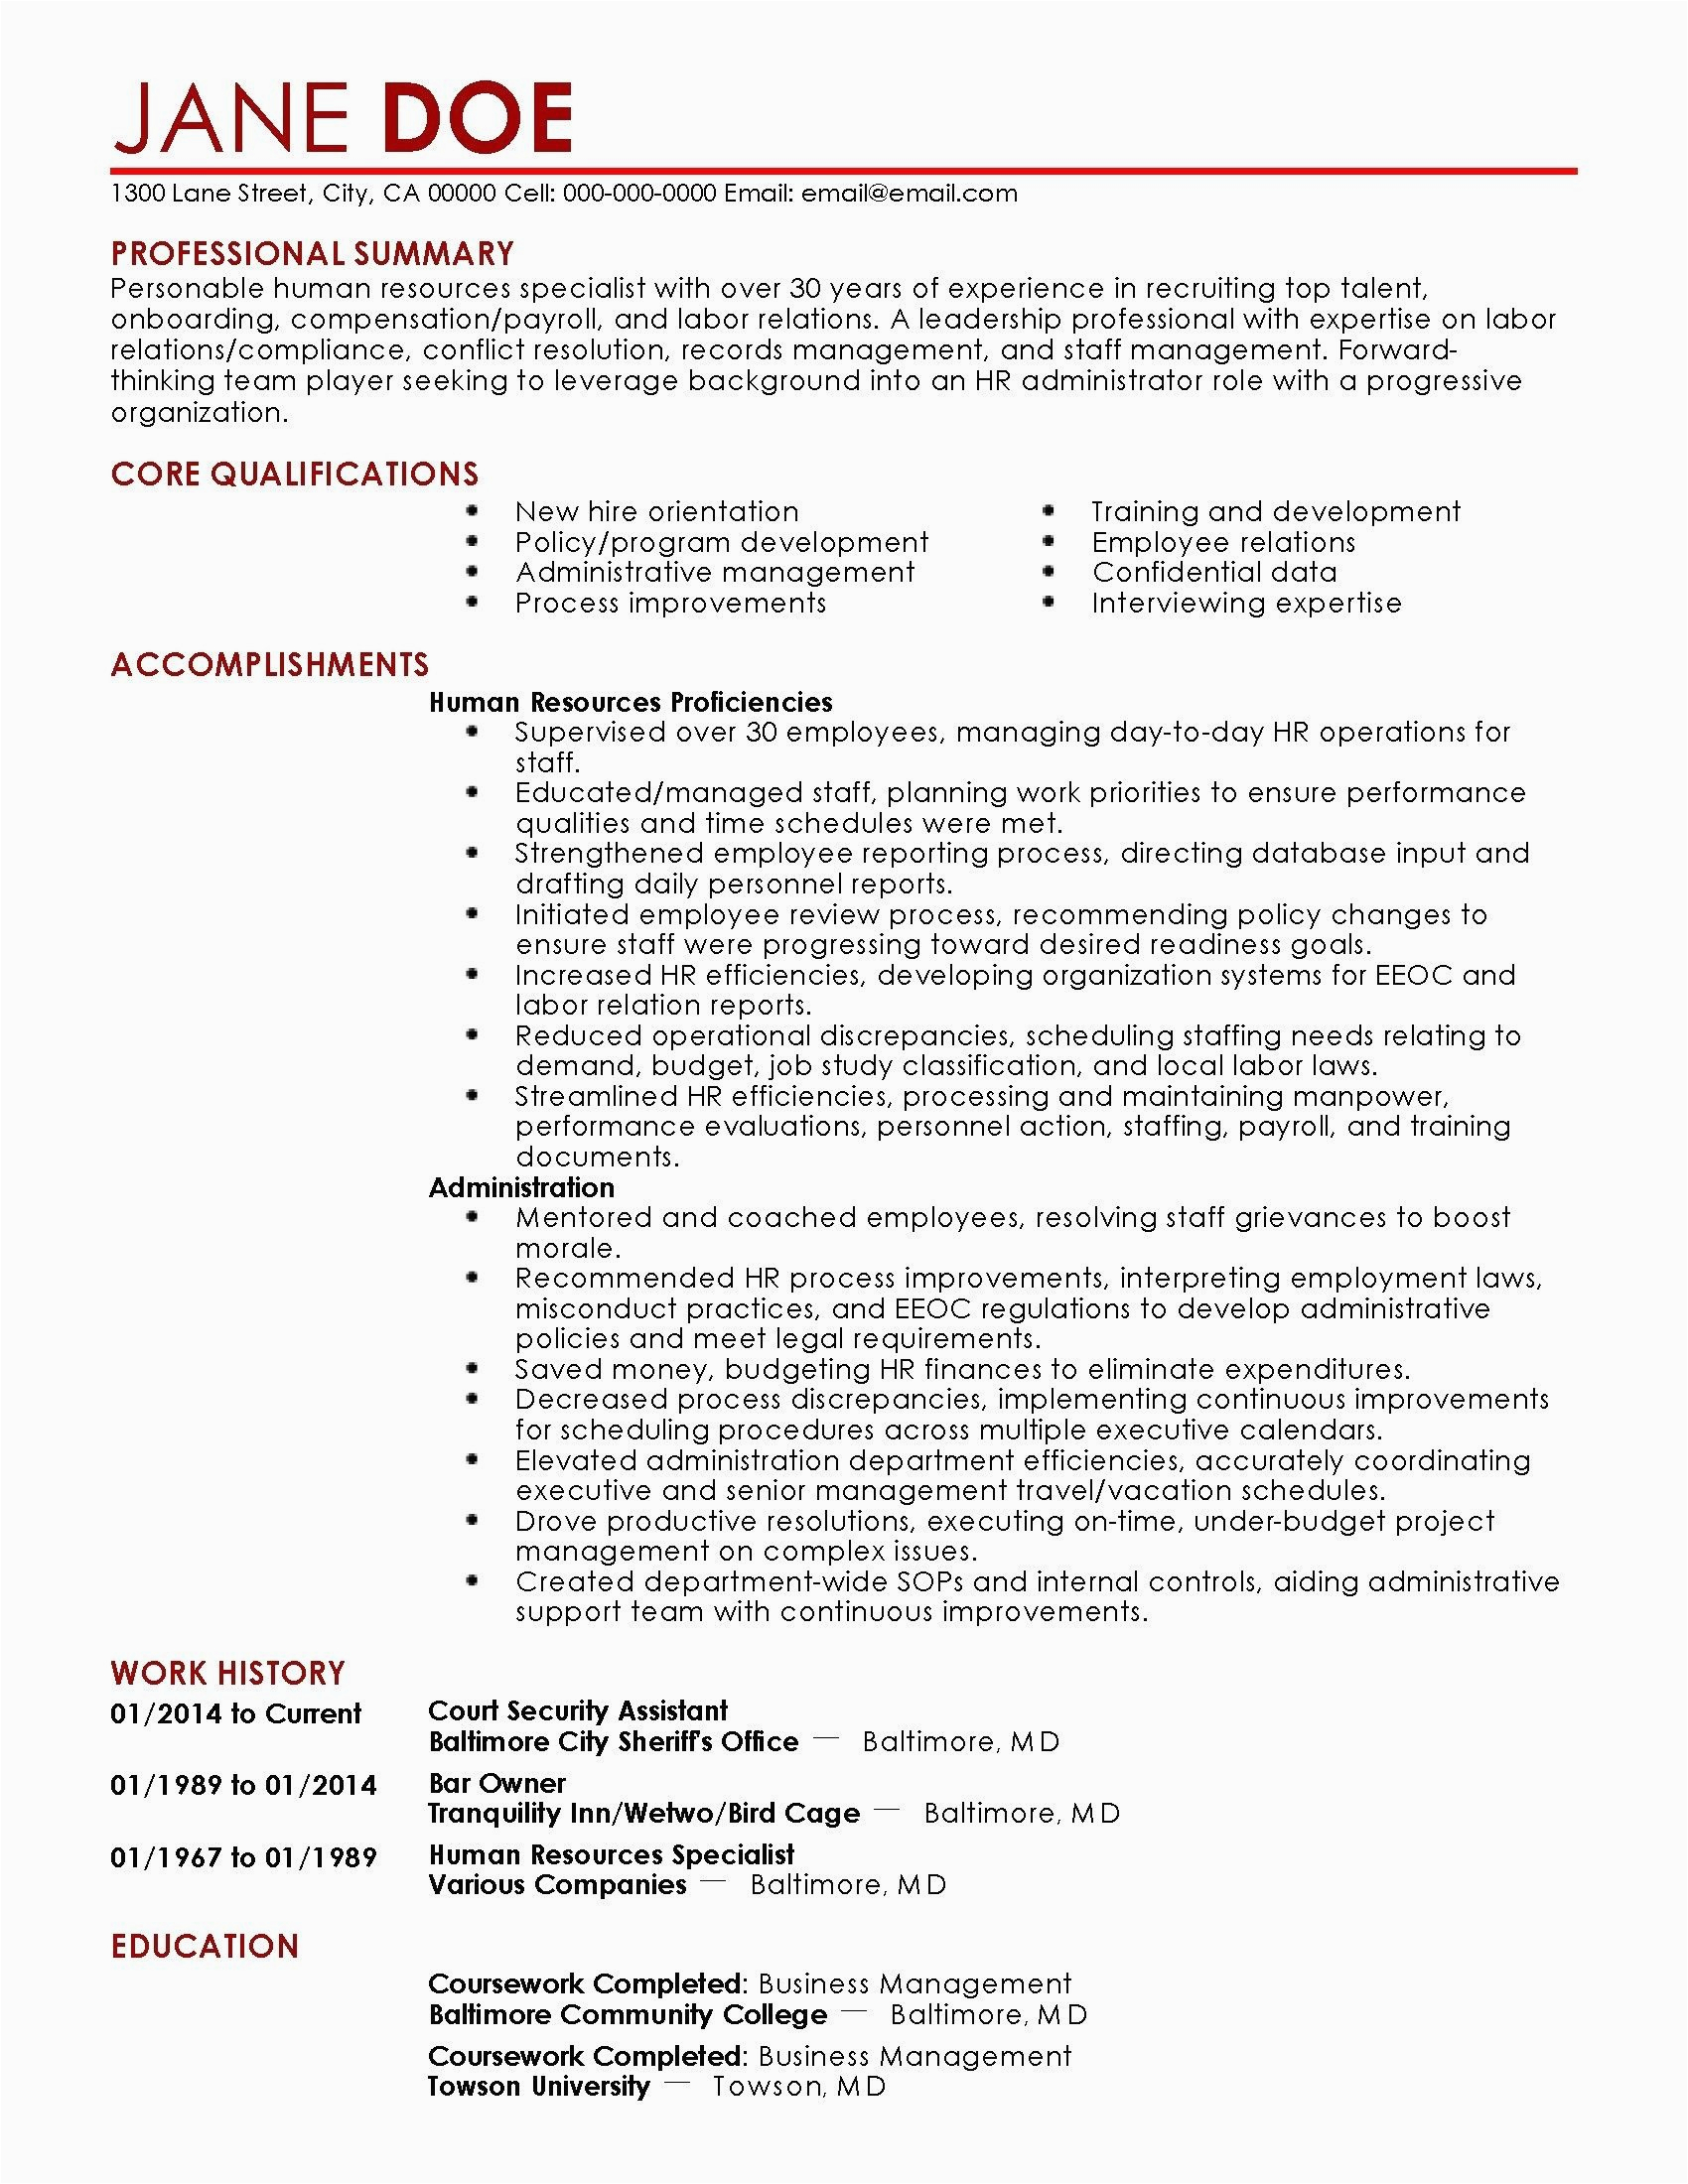 Summary Of Qualifications Sample Resume for Administrative assistant Pin On Resume Templates